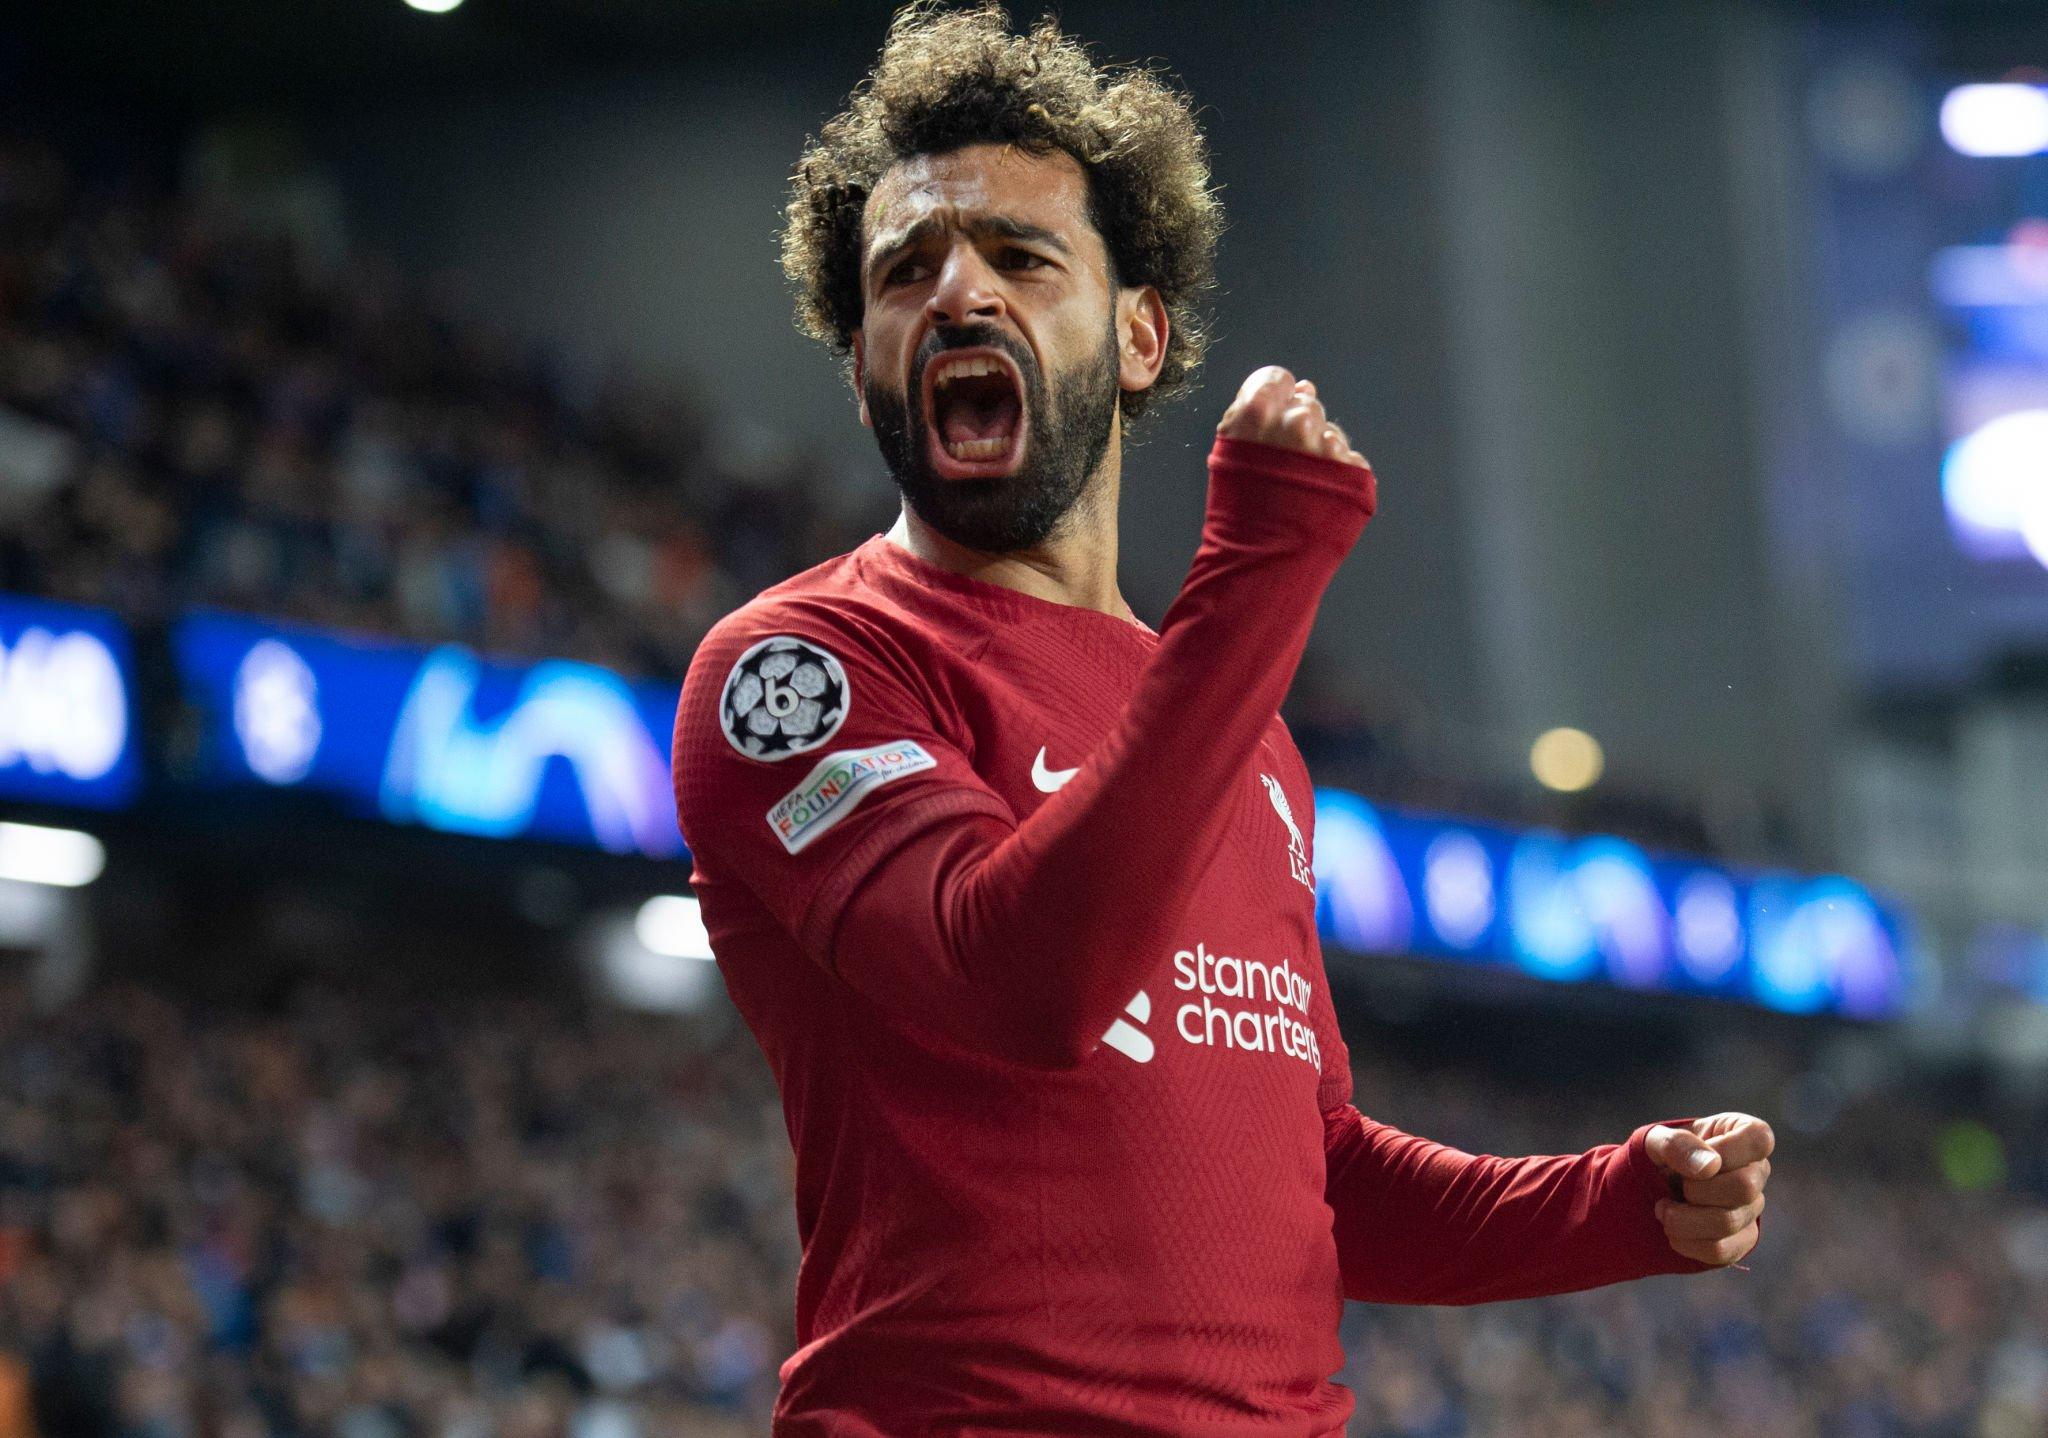 GLASGOW, SCOTLAND - OCTOBER 12: Mohamed Salah of Liverpool FC celebrates scoring his third goal during the UEFA Champions League group A match between Rangers FC and Liverpool FC at Ibrox Stadium on October 12, 2022 in Glasgow, United Kingdom. (Photo by Joe Prior/Visionhaus via Getty Images)